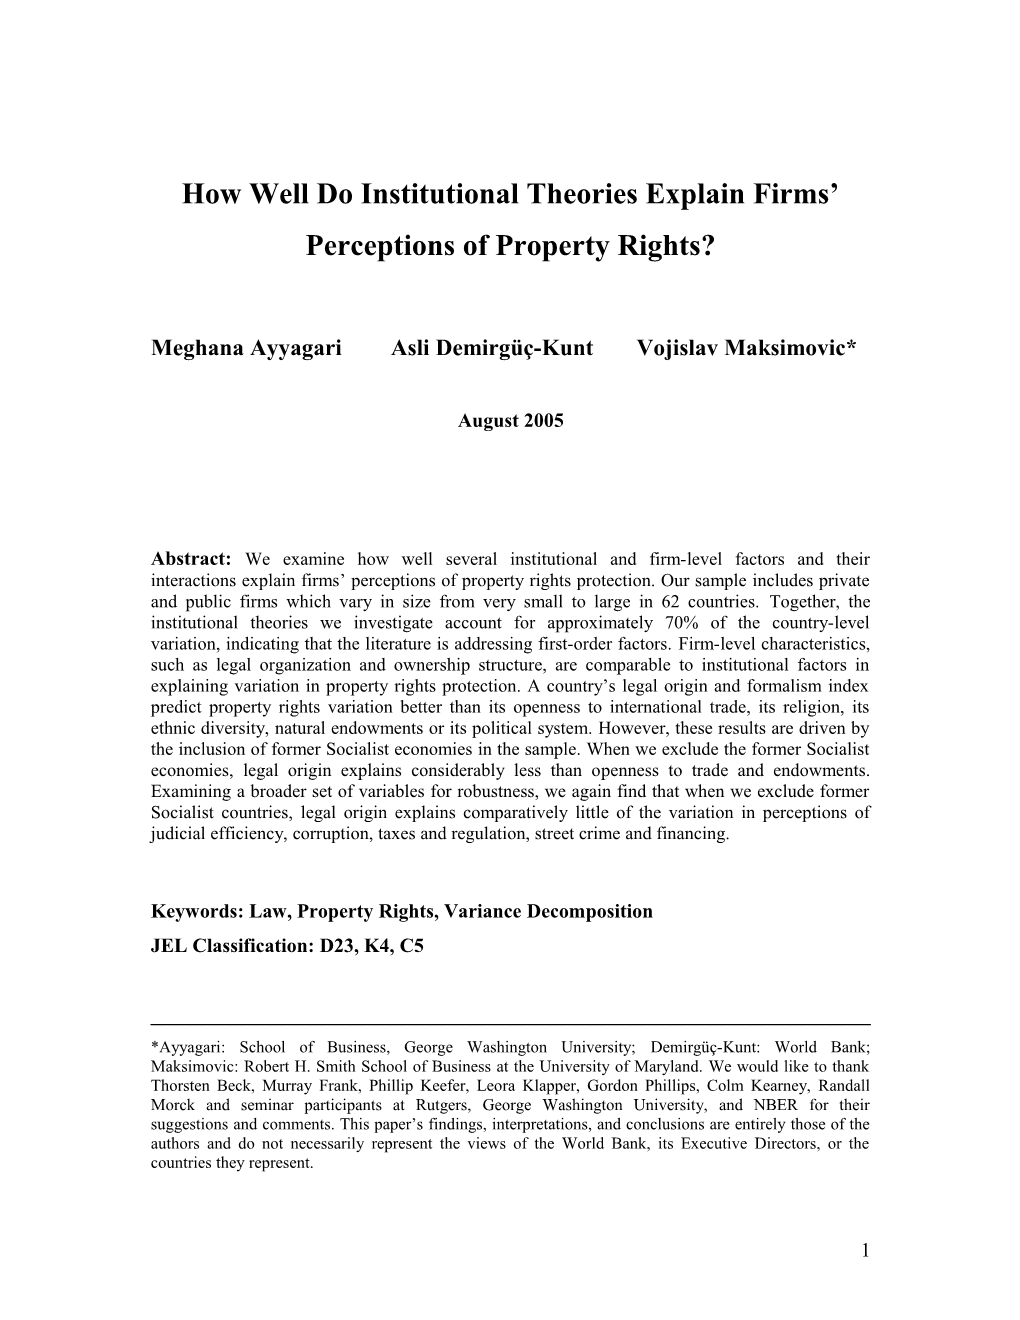 How Well Do Institutional Theories Explain Firms Perceptions of Property Rights